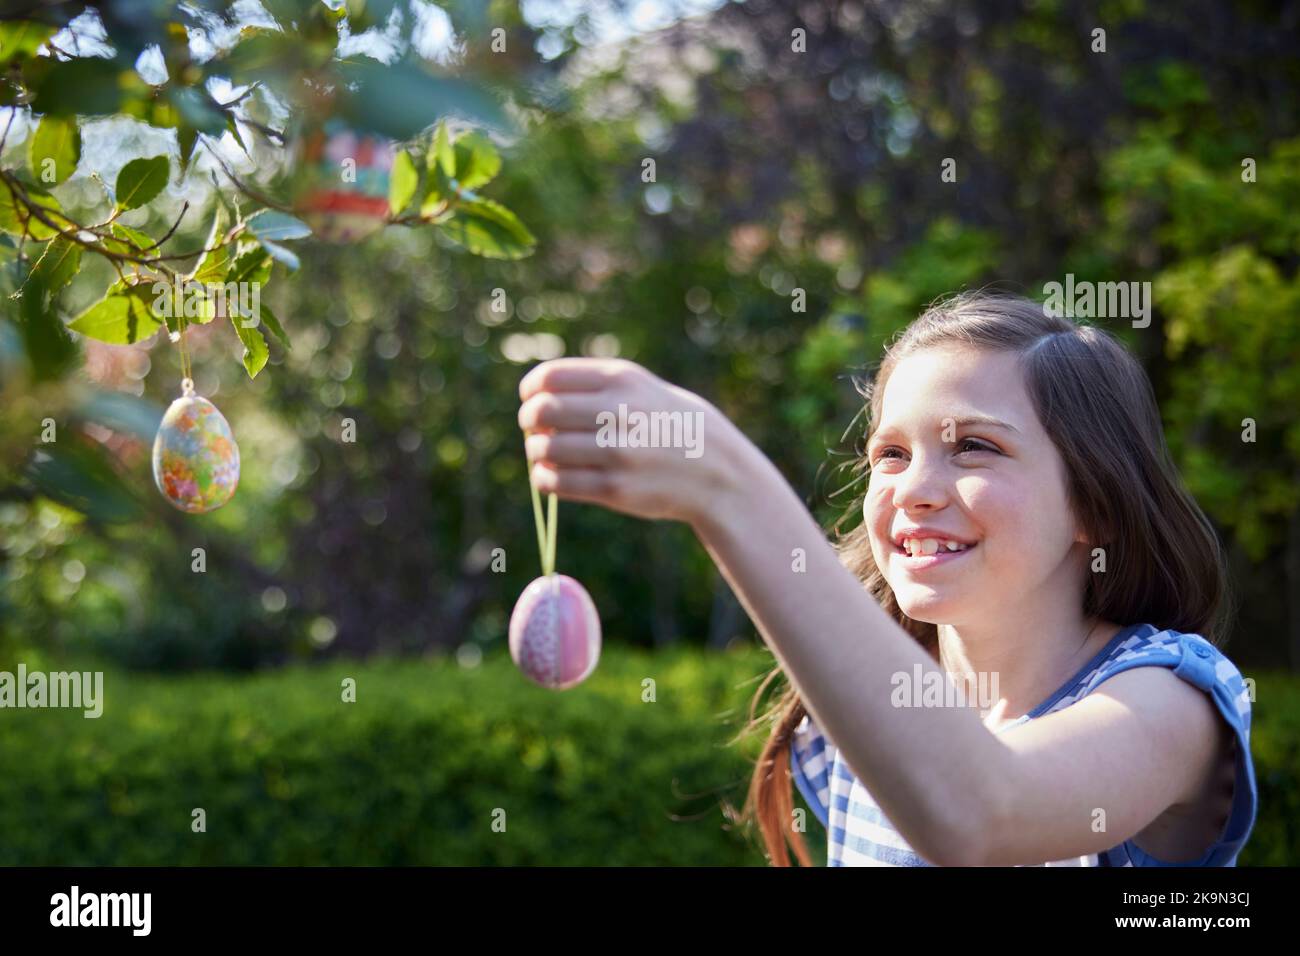 Girl Hanging Homemade Easter Decorations Outdoors On Tree In Garden At Home Stock Photo